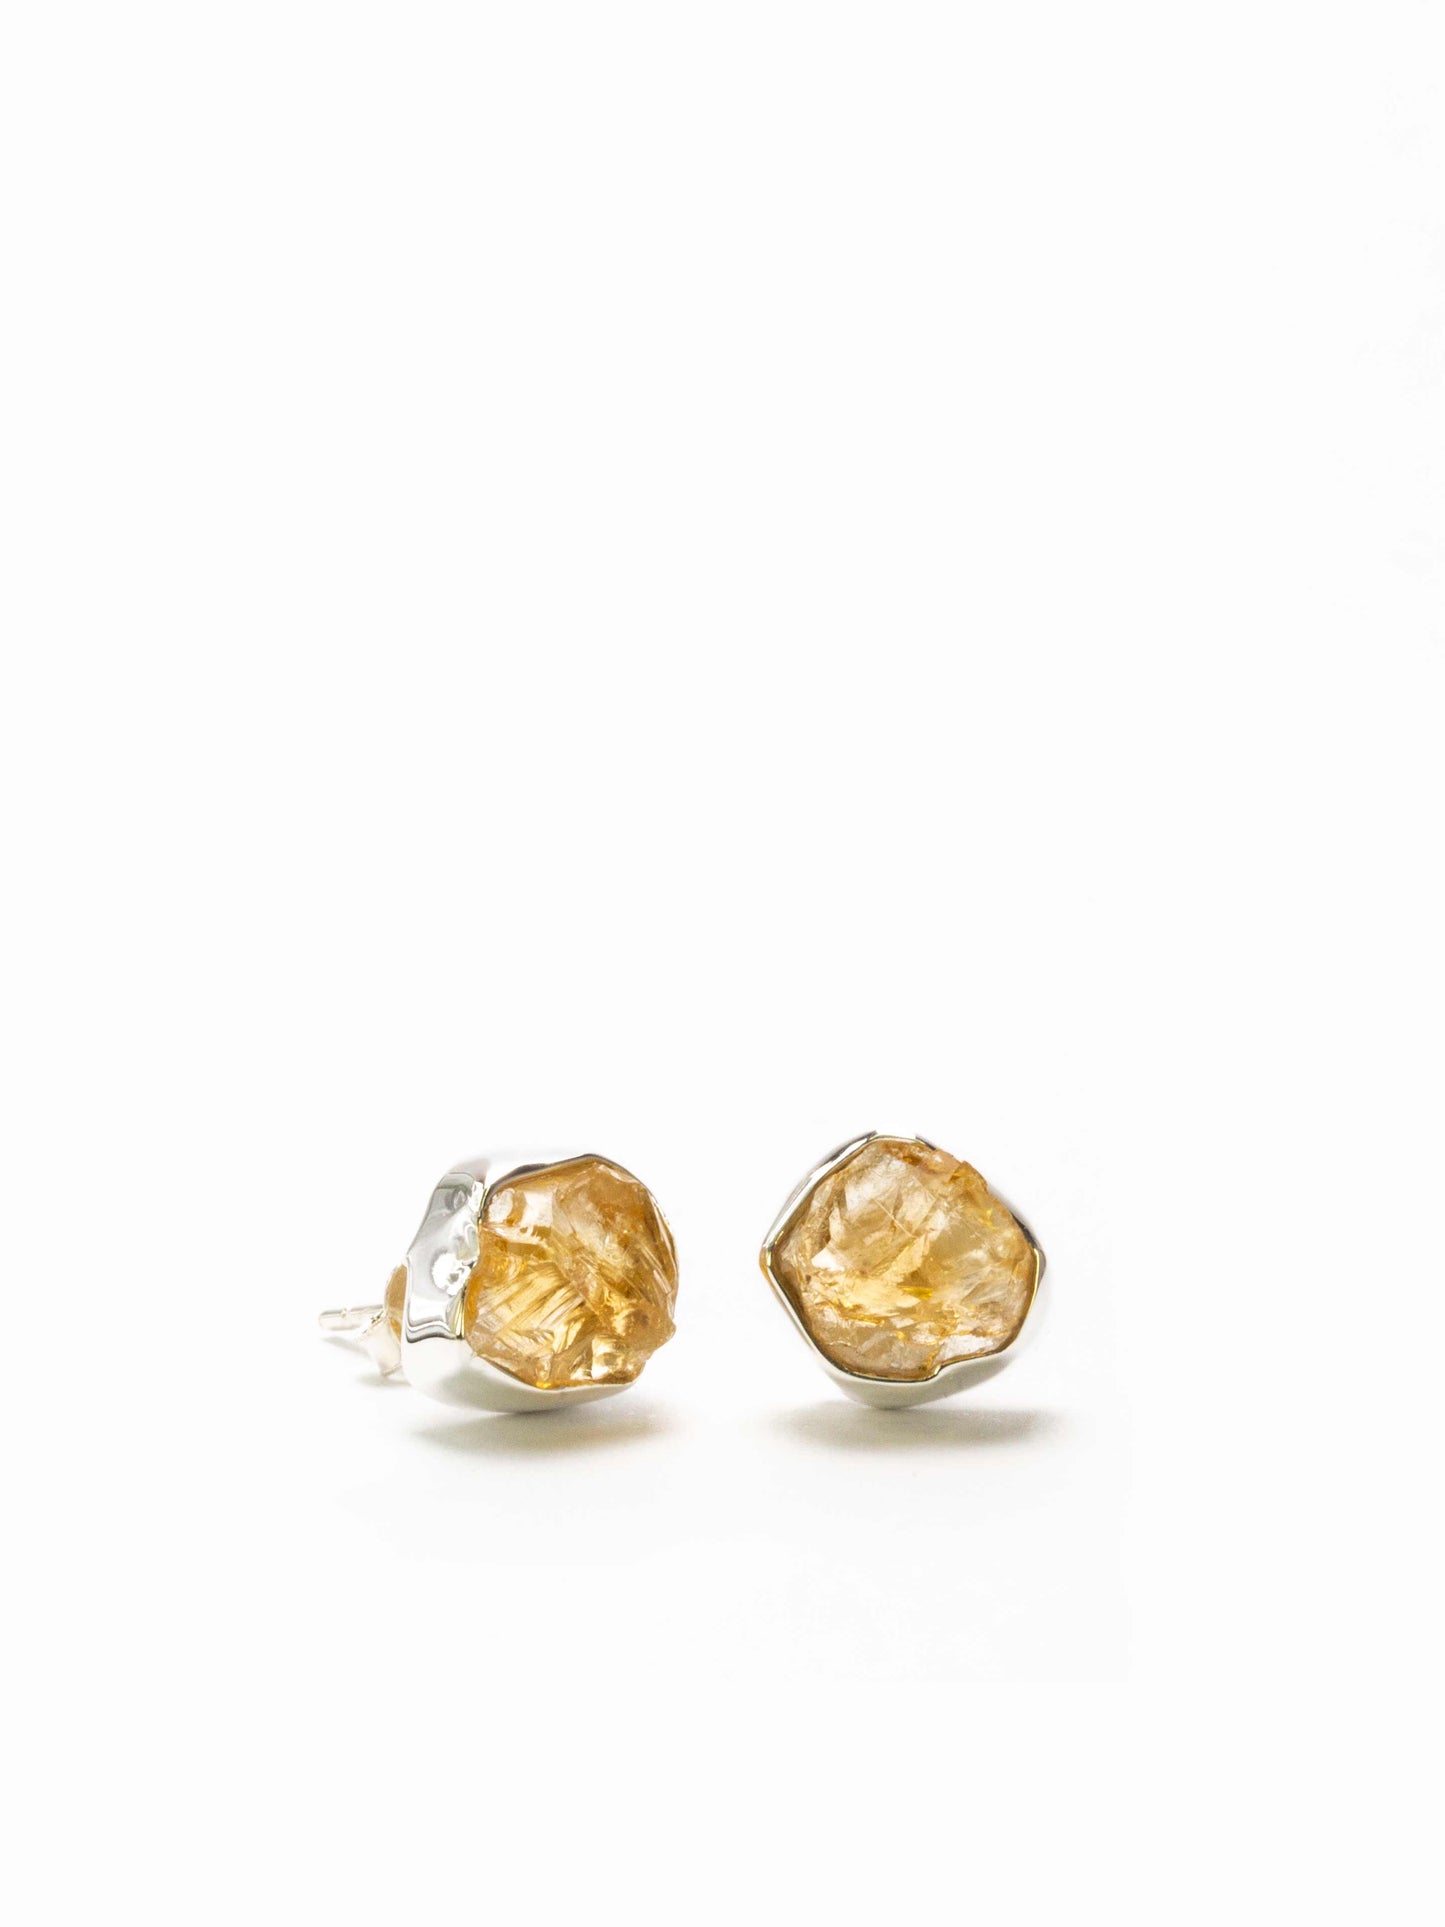 Citrine and silver studs